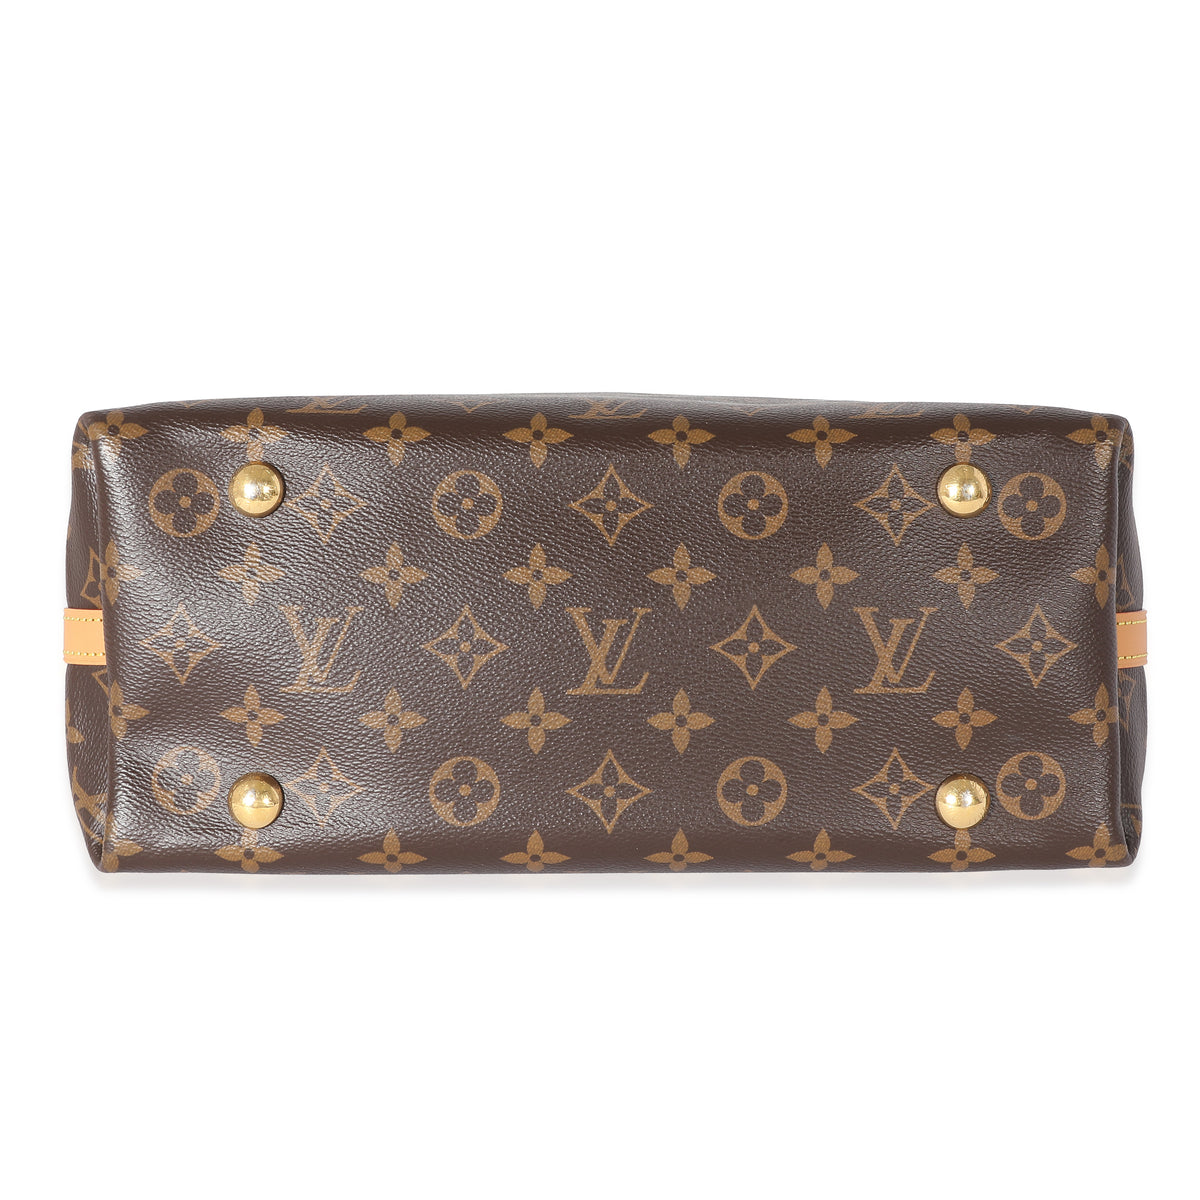 Date Code & Stamp] Louis Vuitton Neverfull PM Monogram Canvas